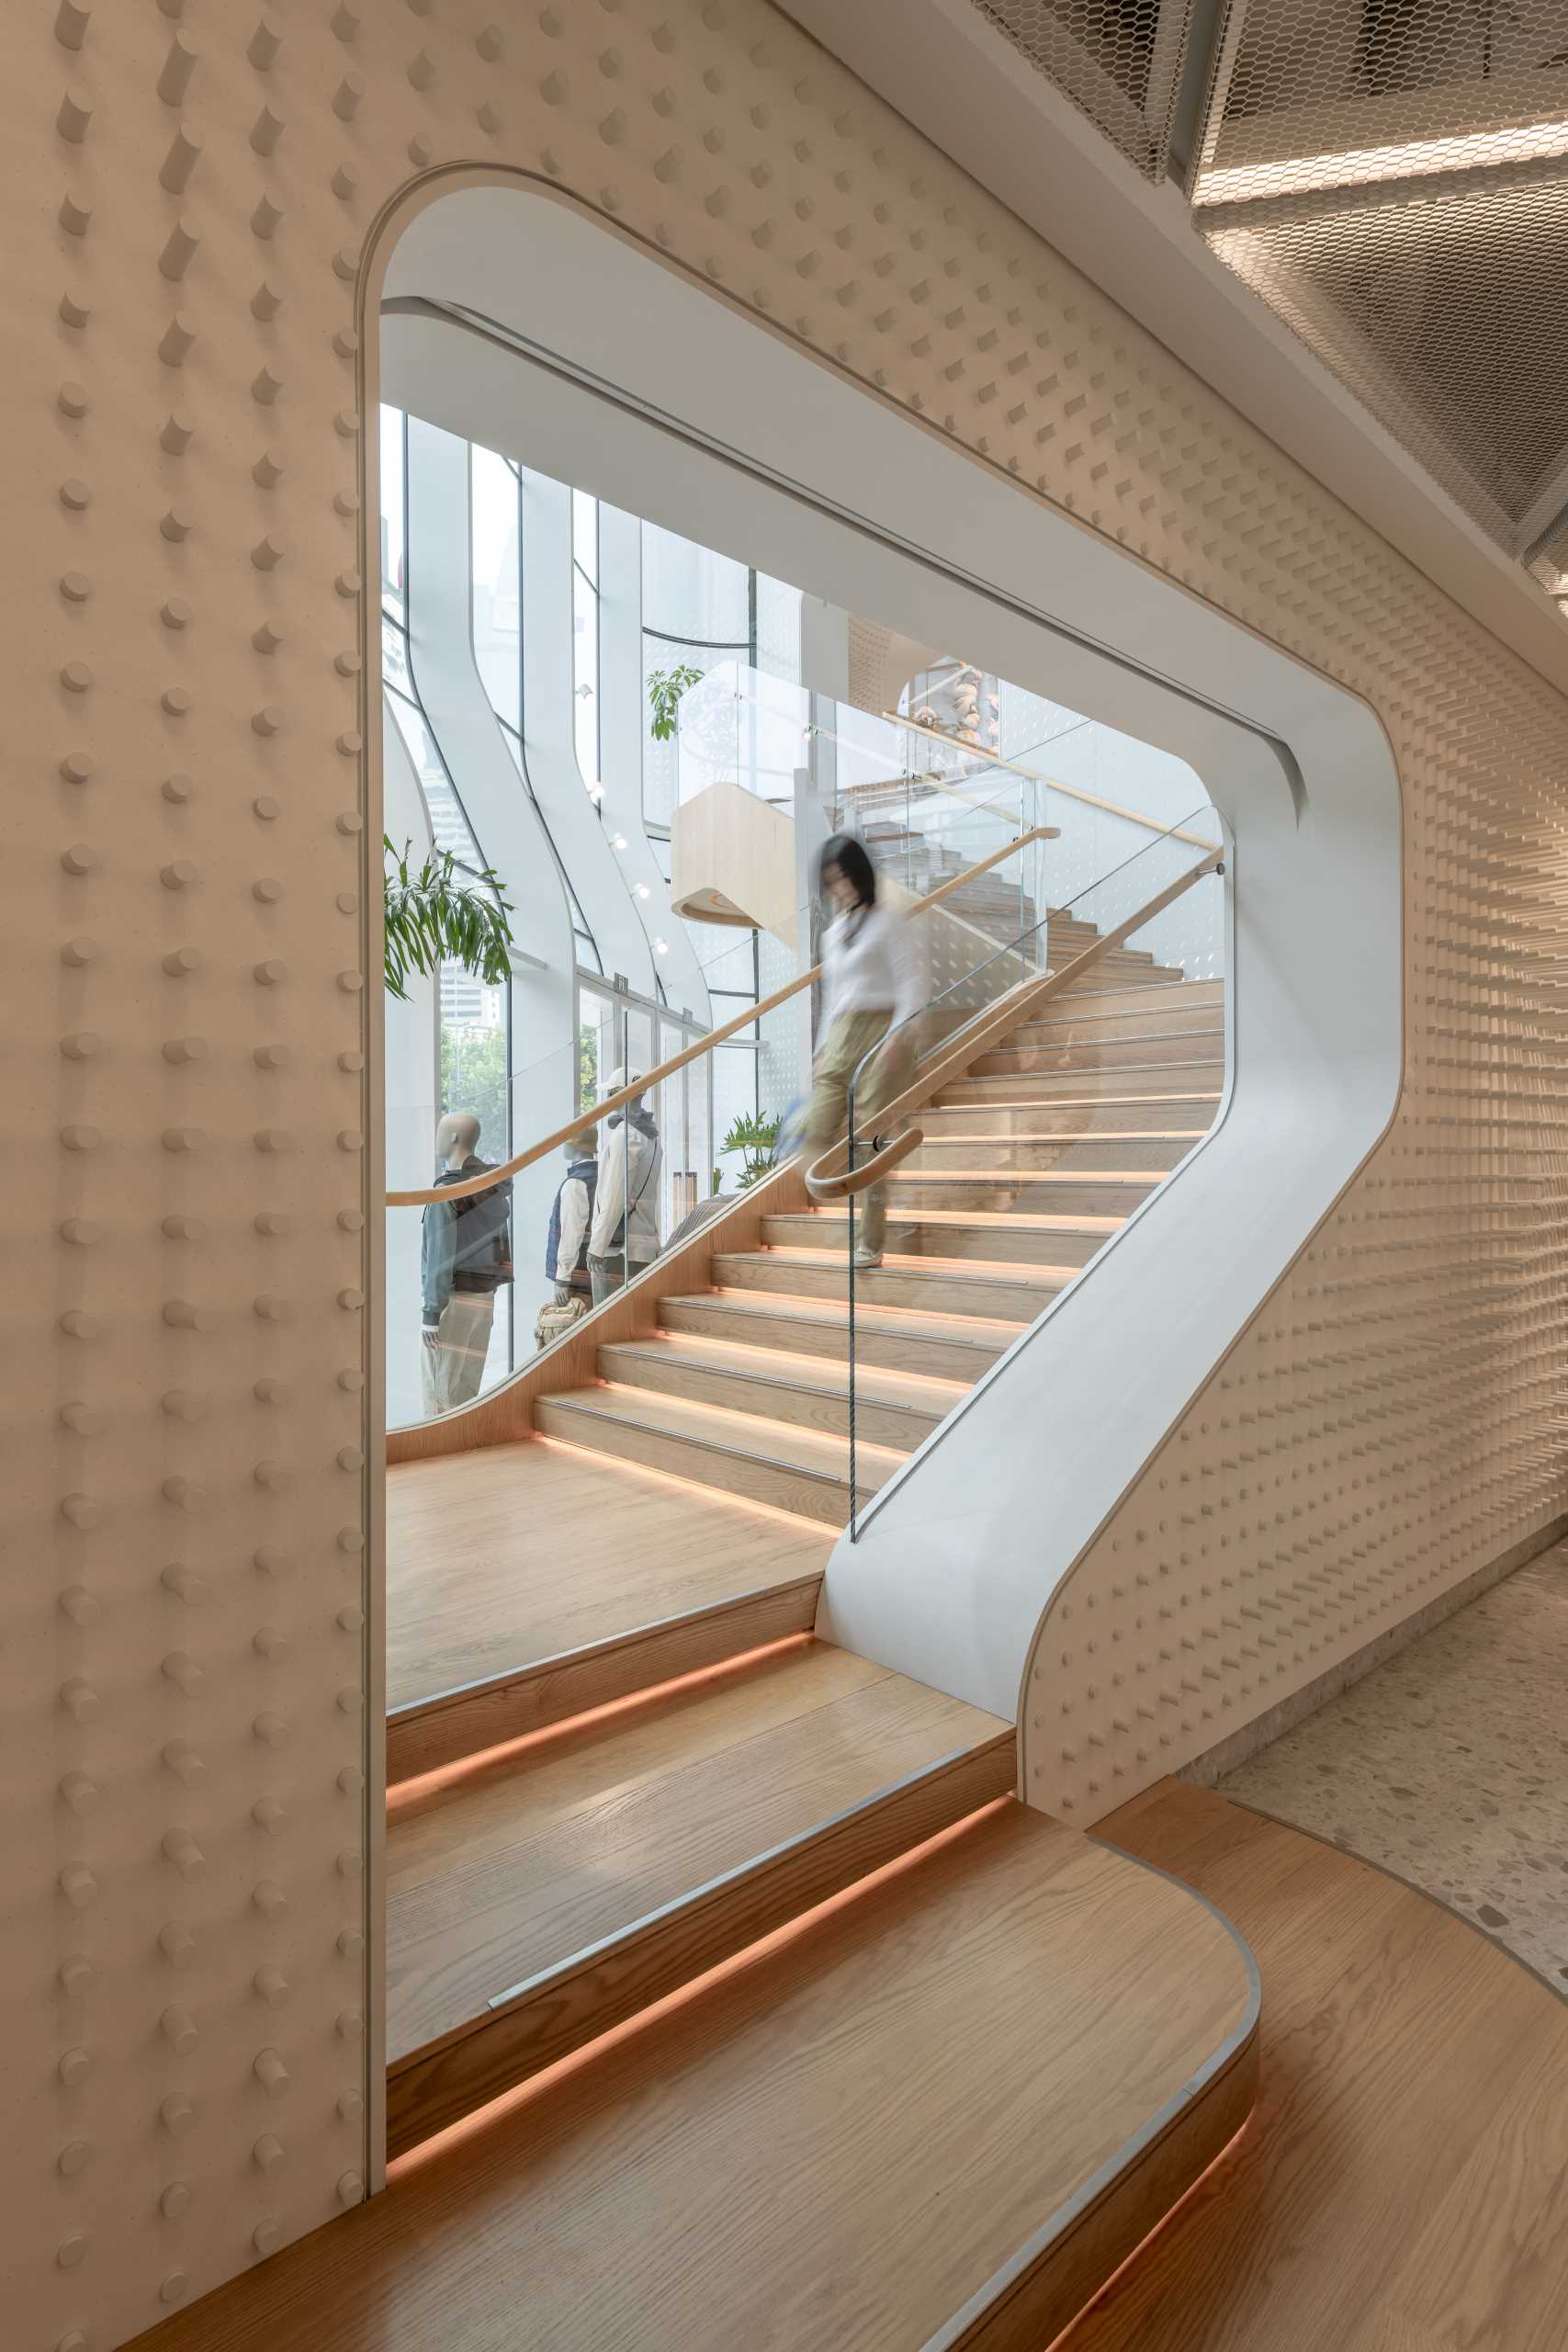 A modern Lululemon flag،p store has curved walls with a large staircase that connects the multiple floors.